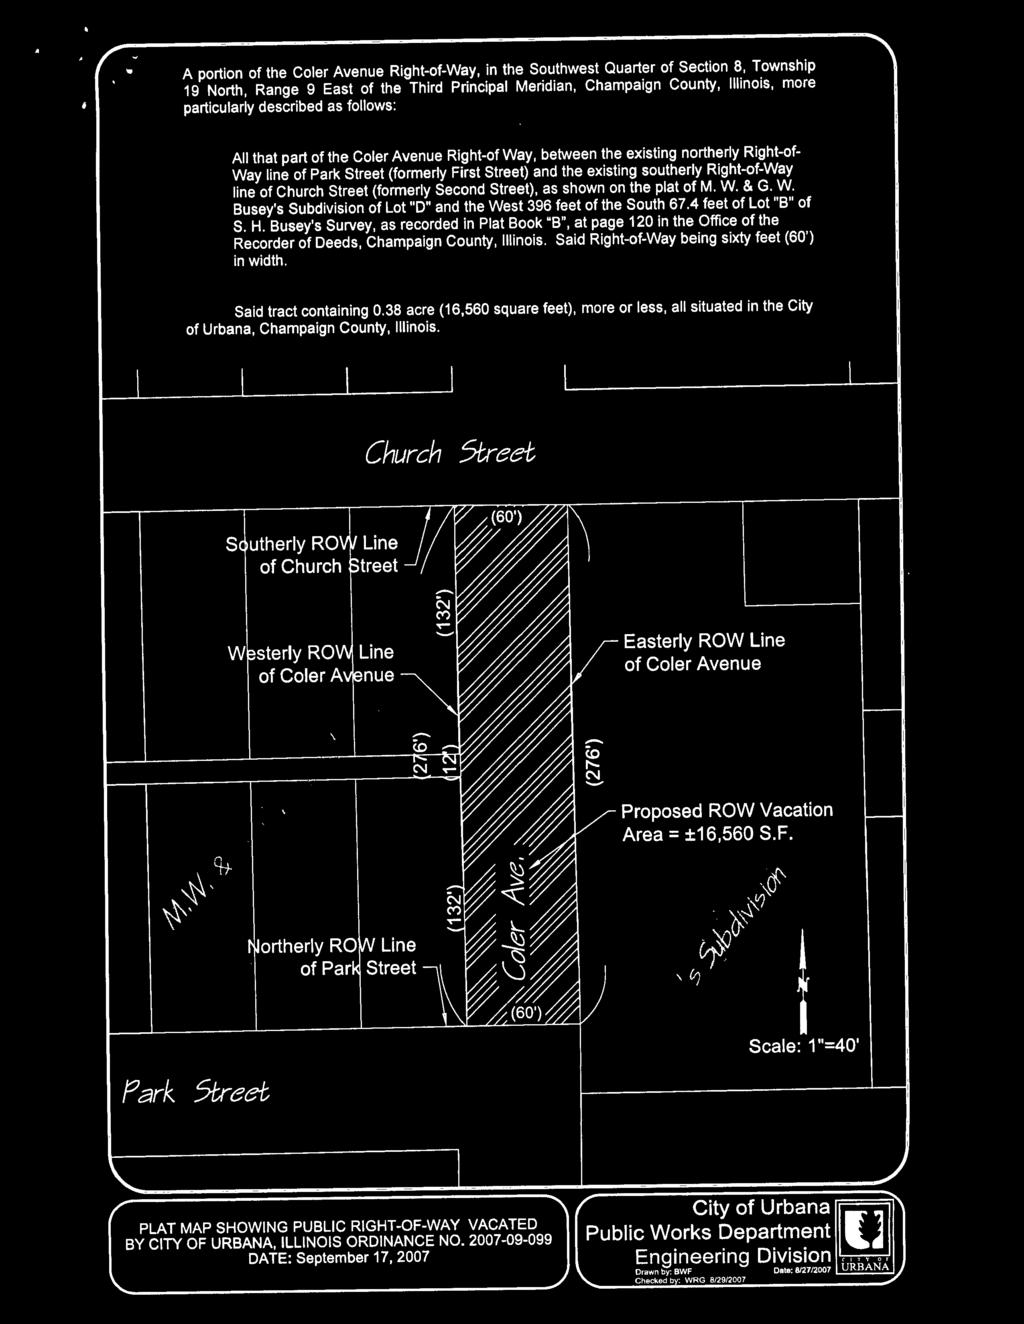 line of Church Street (formerly Second Street), as shown on the plat of M. W. & G. W. Busey's Subdivision of Lot "D" and the West 396 feet of the South 67.4 feet of Lot "B" of S. H.